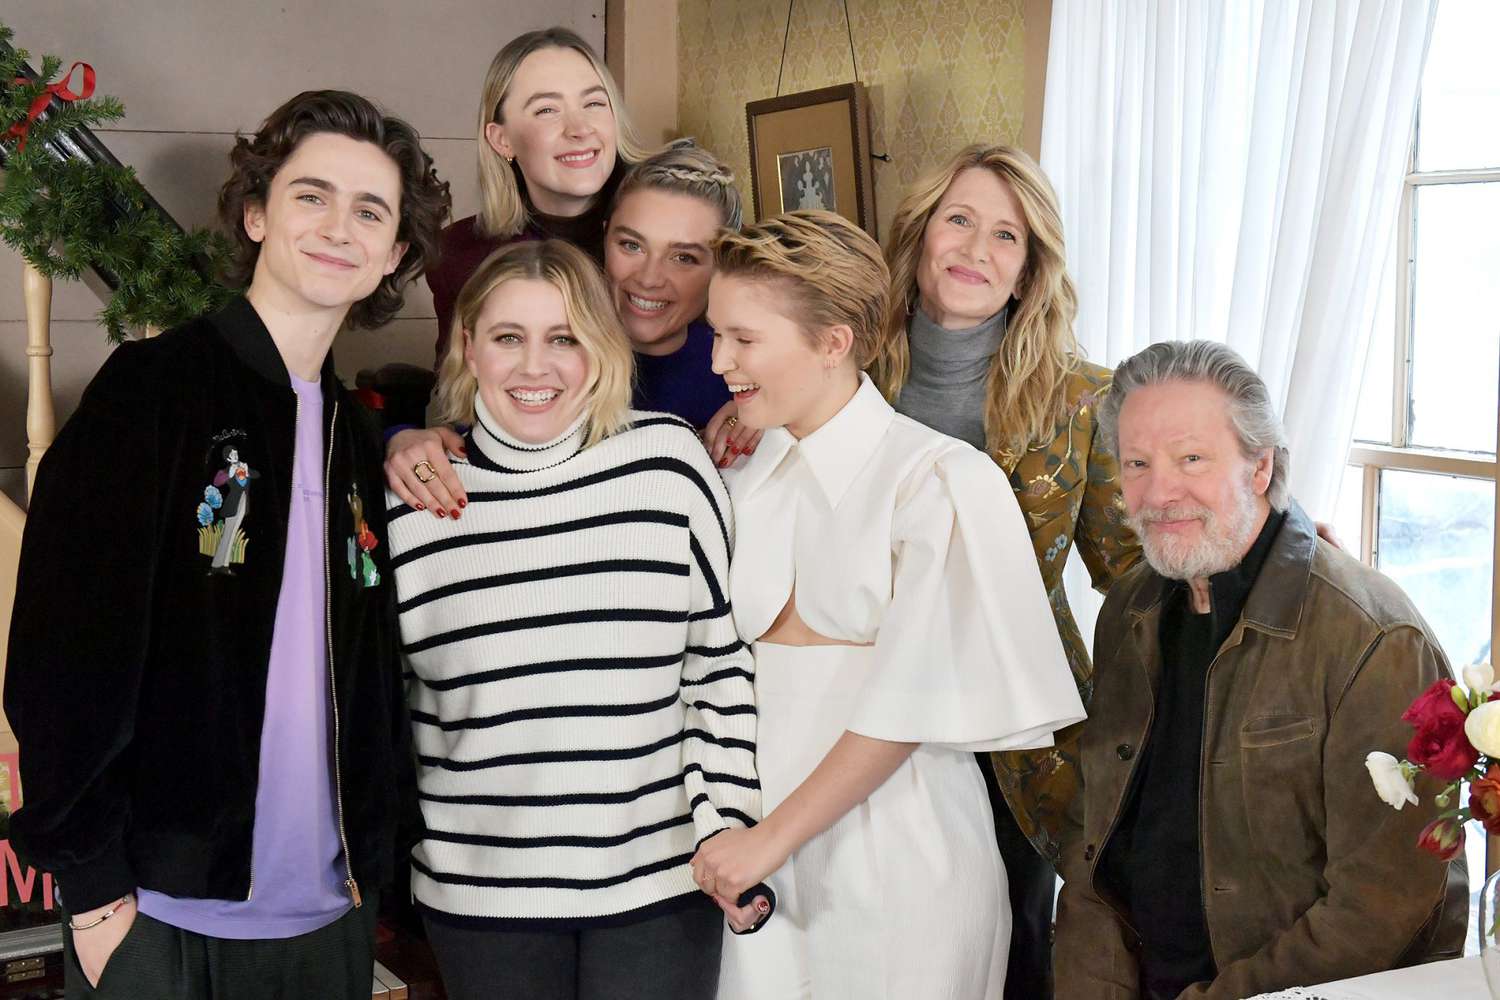 Timothee Chalamet, Greta Gerwig, Saoirse Ronan, Florence Pugh, Eliza Scanlan, Laura Dern and Chris Cooper attend the 'Little Women" Orchard House photo call at the Louisa May Alcott Orchard House on December 4, 2019 in Concord, Massachusetts